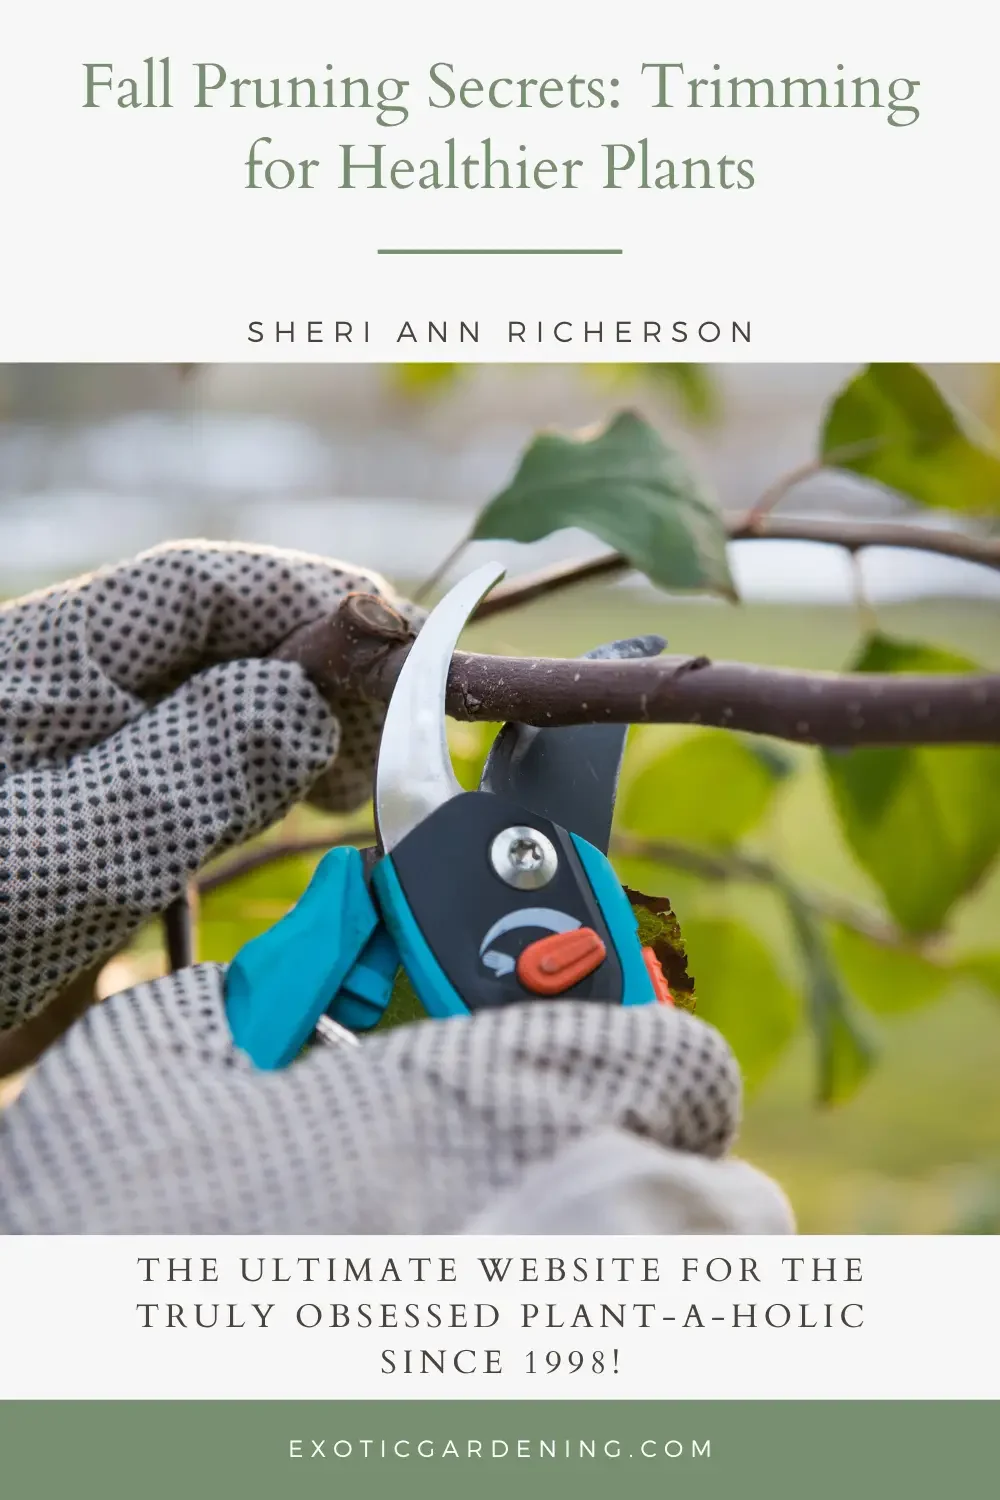 Using hand pruners to remove a branch from a tree.